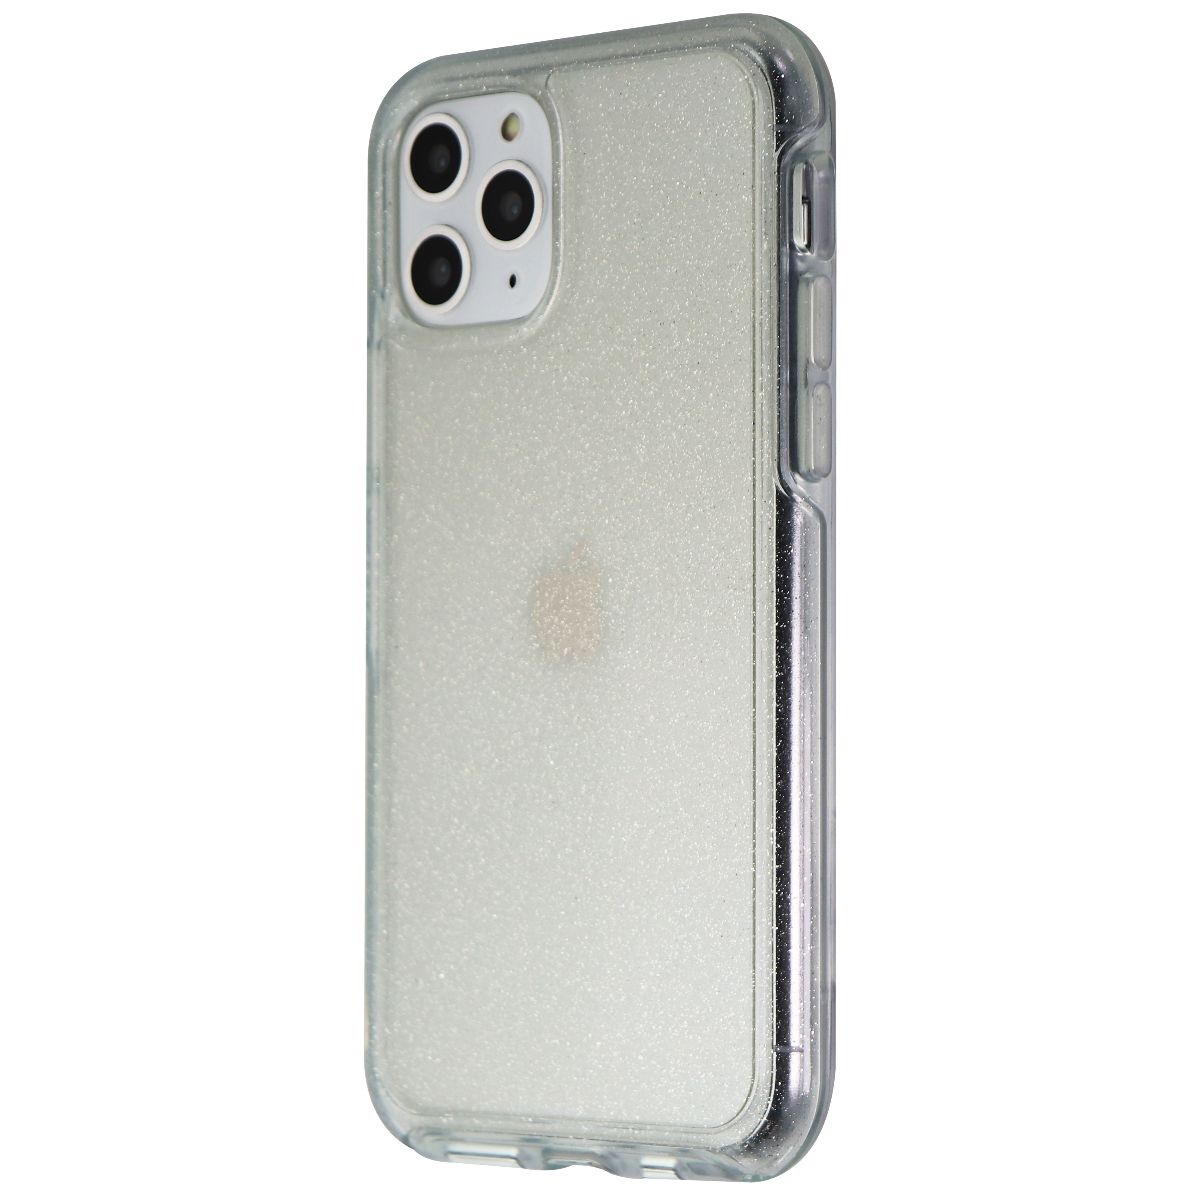 OtterBox Symmetry Series Case for Apple iPhone 11 Pro - Stardust (Used) - image 1 of 2